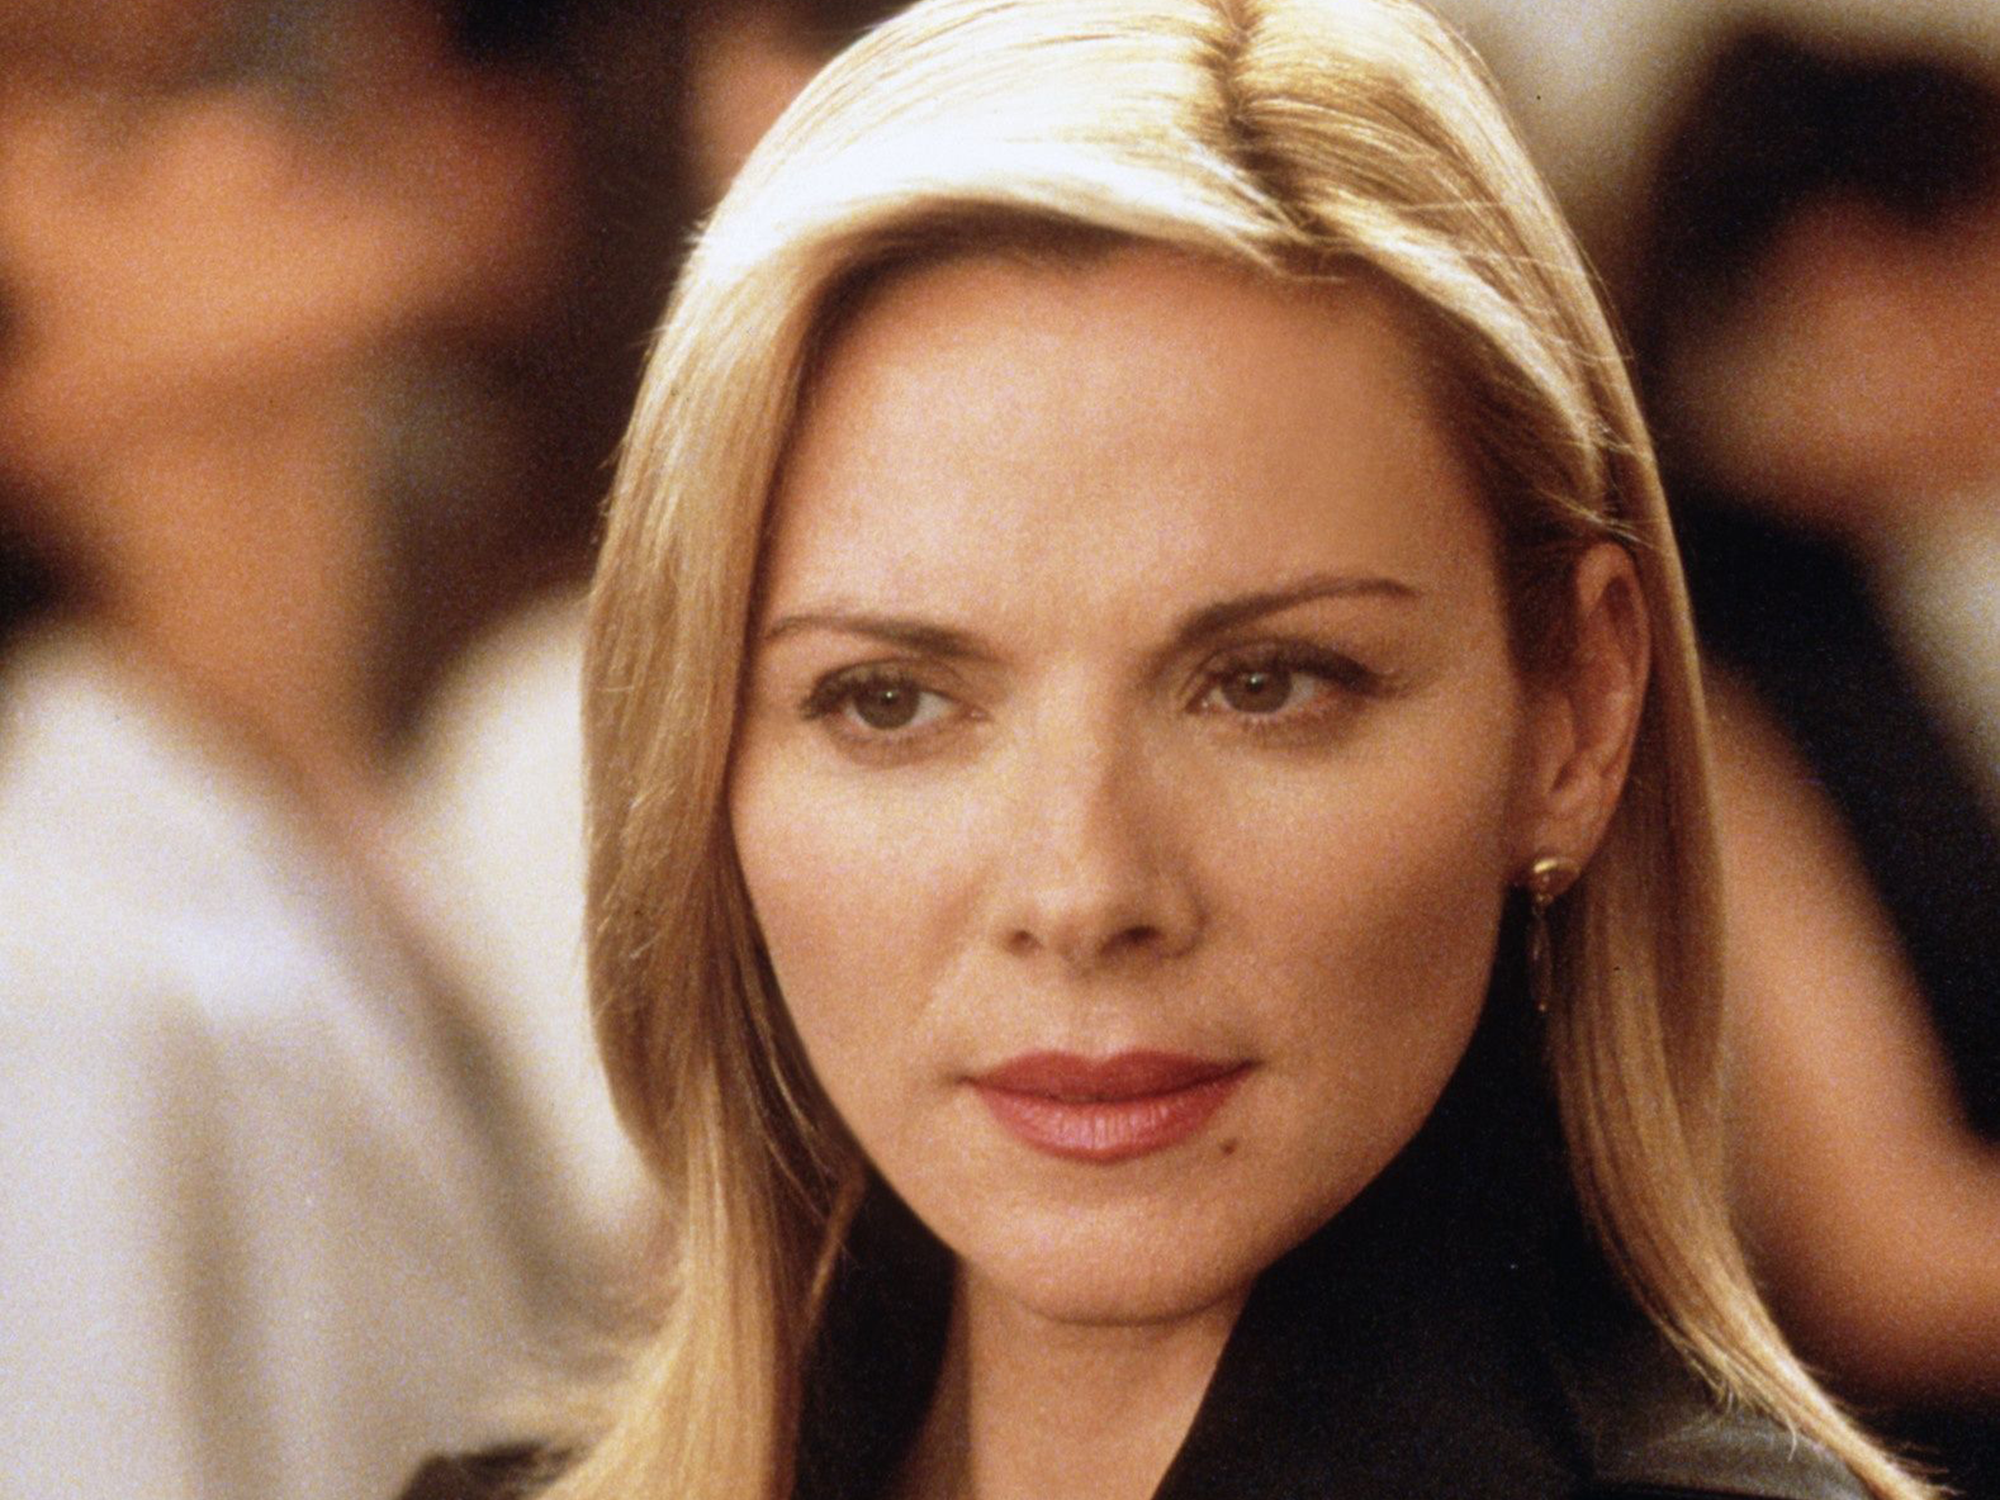 Kim Cattrall Shares Heartbreaking News in Emotional Instagram Post